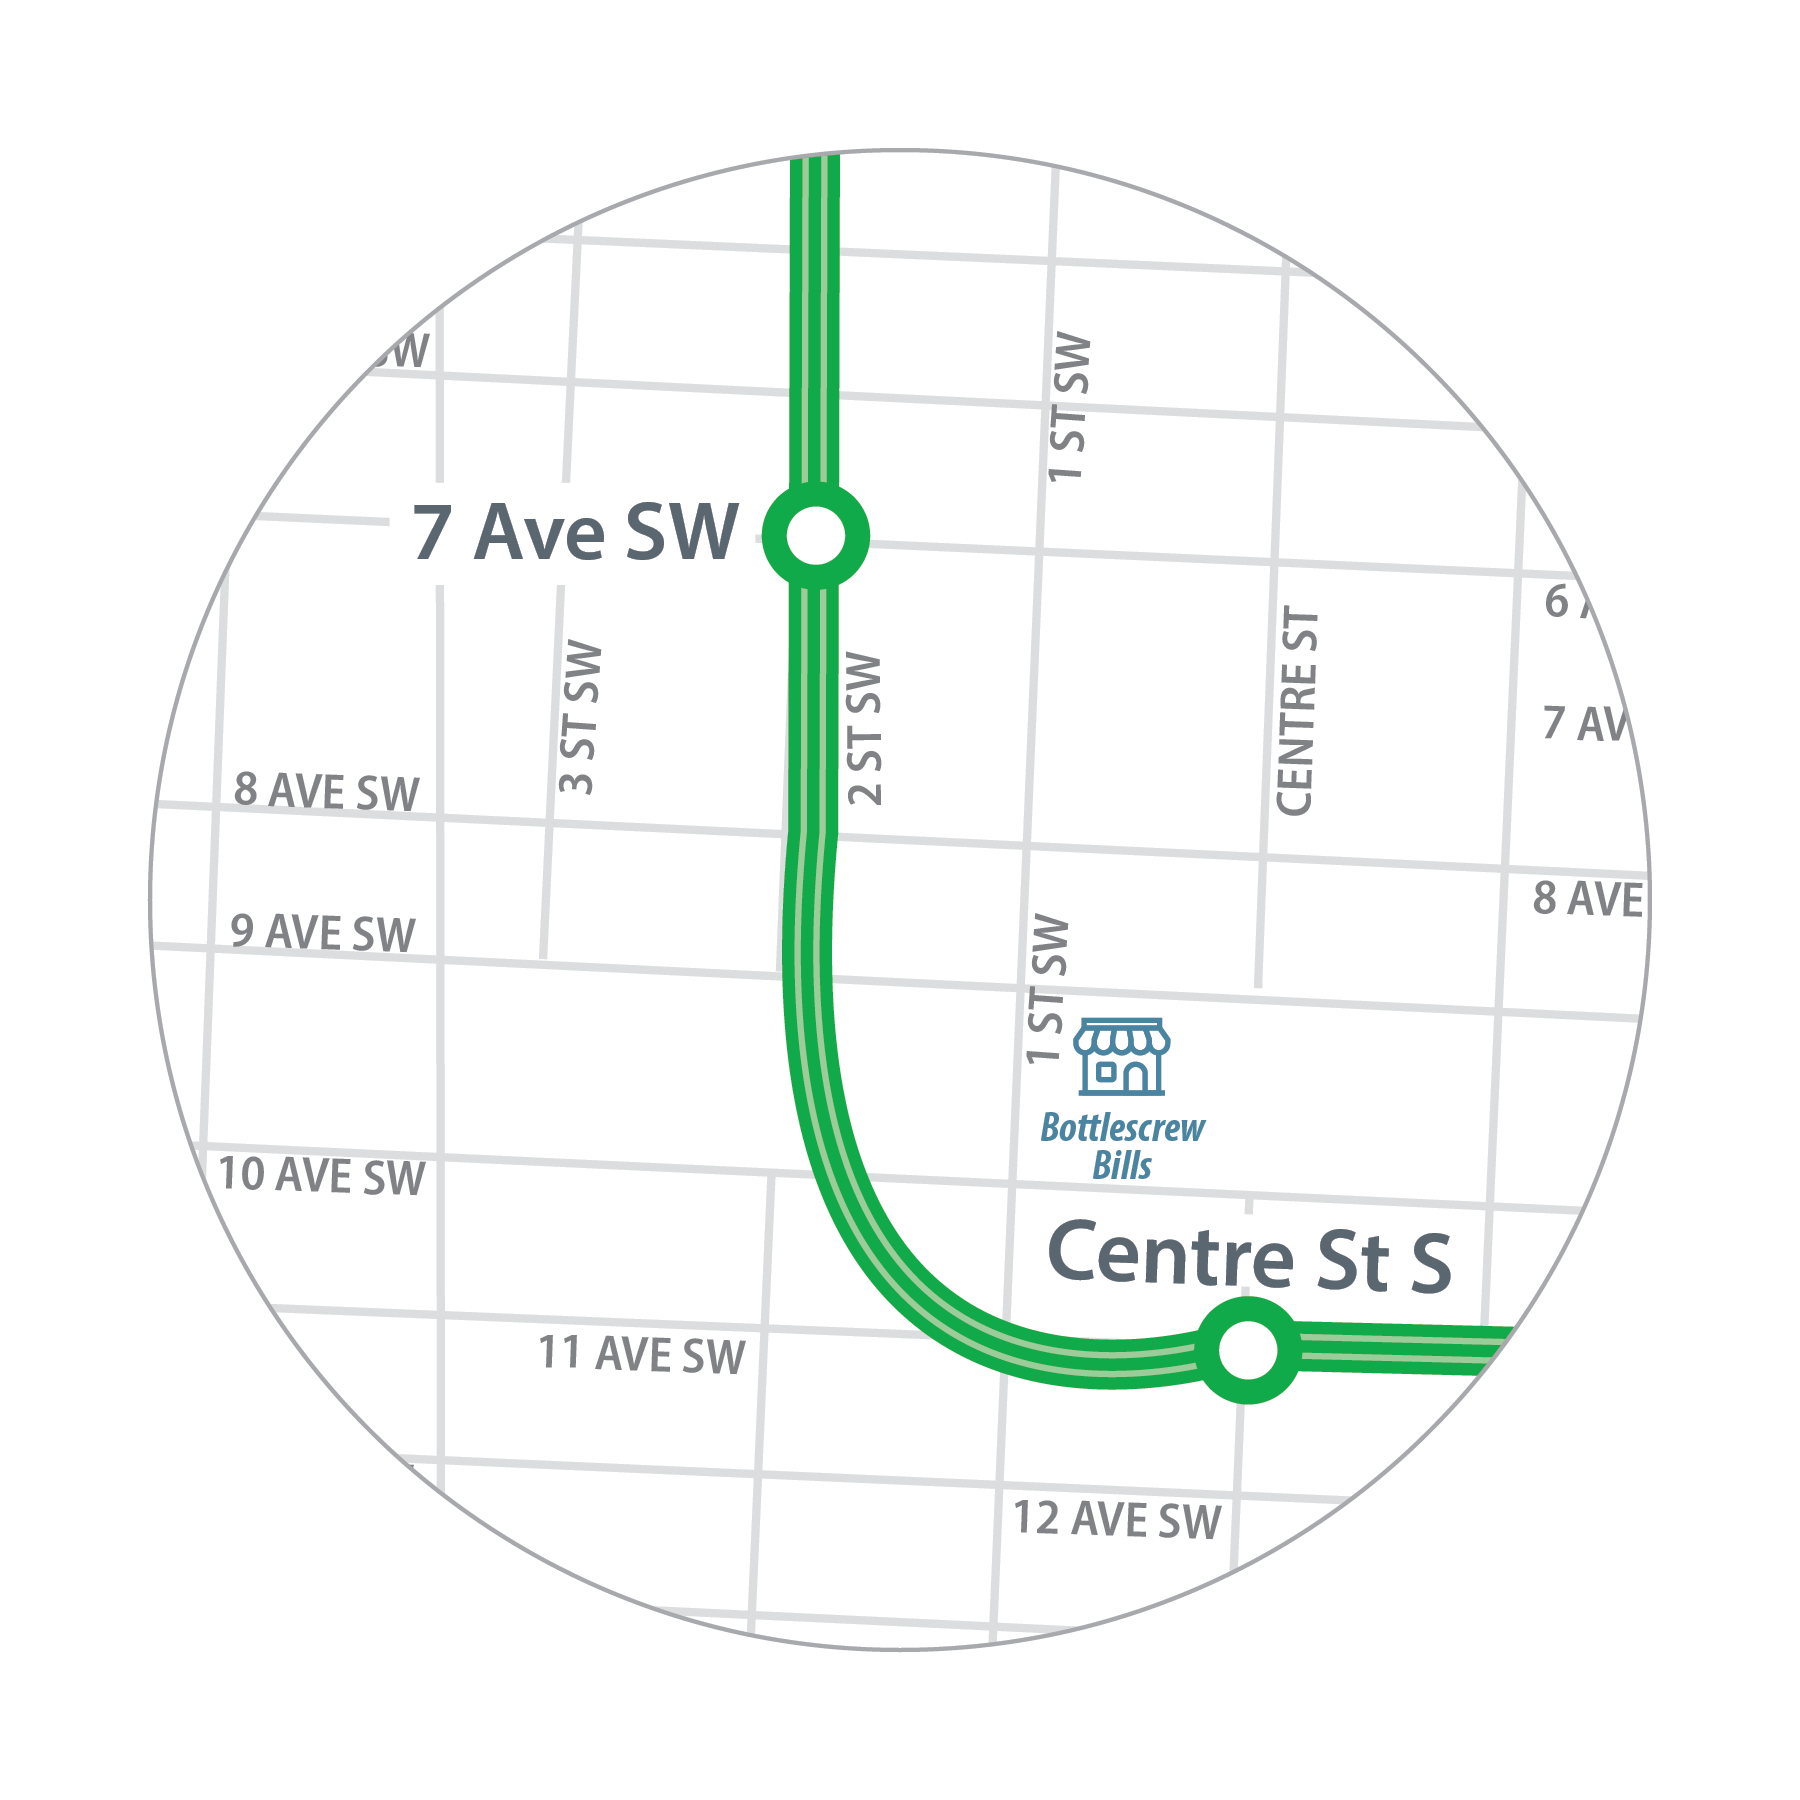 Map of Bottlescrew Bill's location in relation to 7 Avenue S.W. and Centres Street S. Stations.